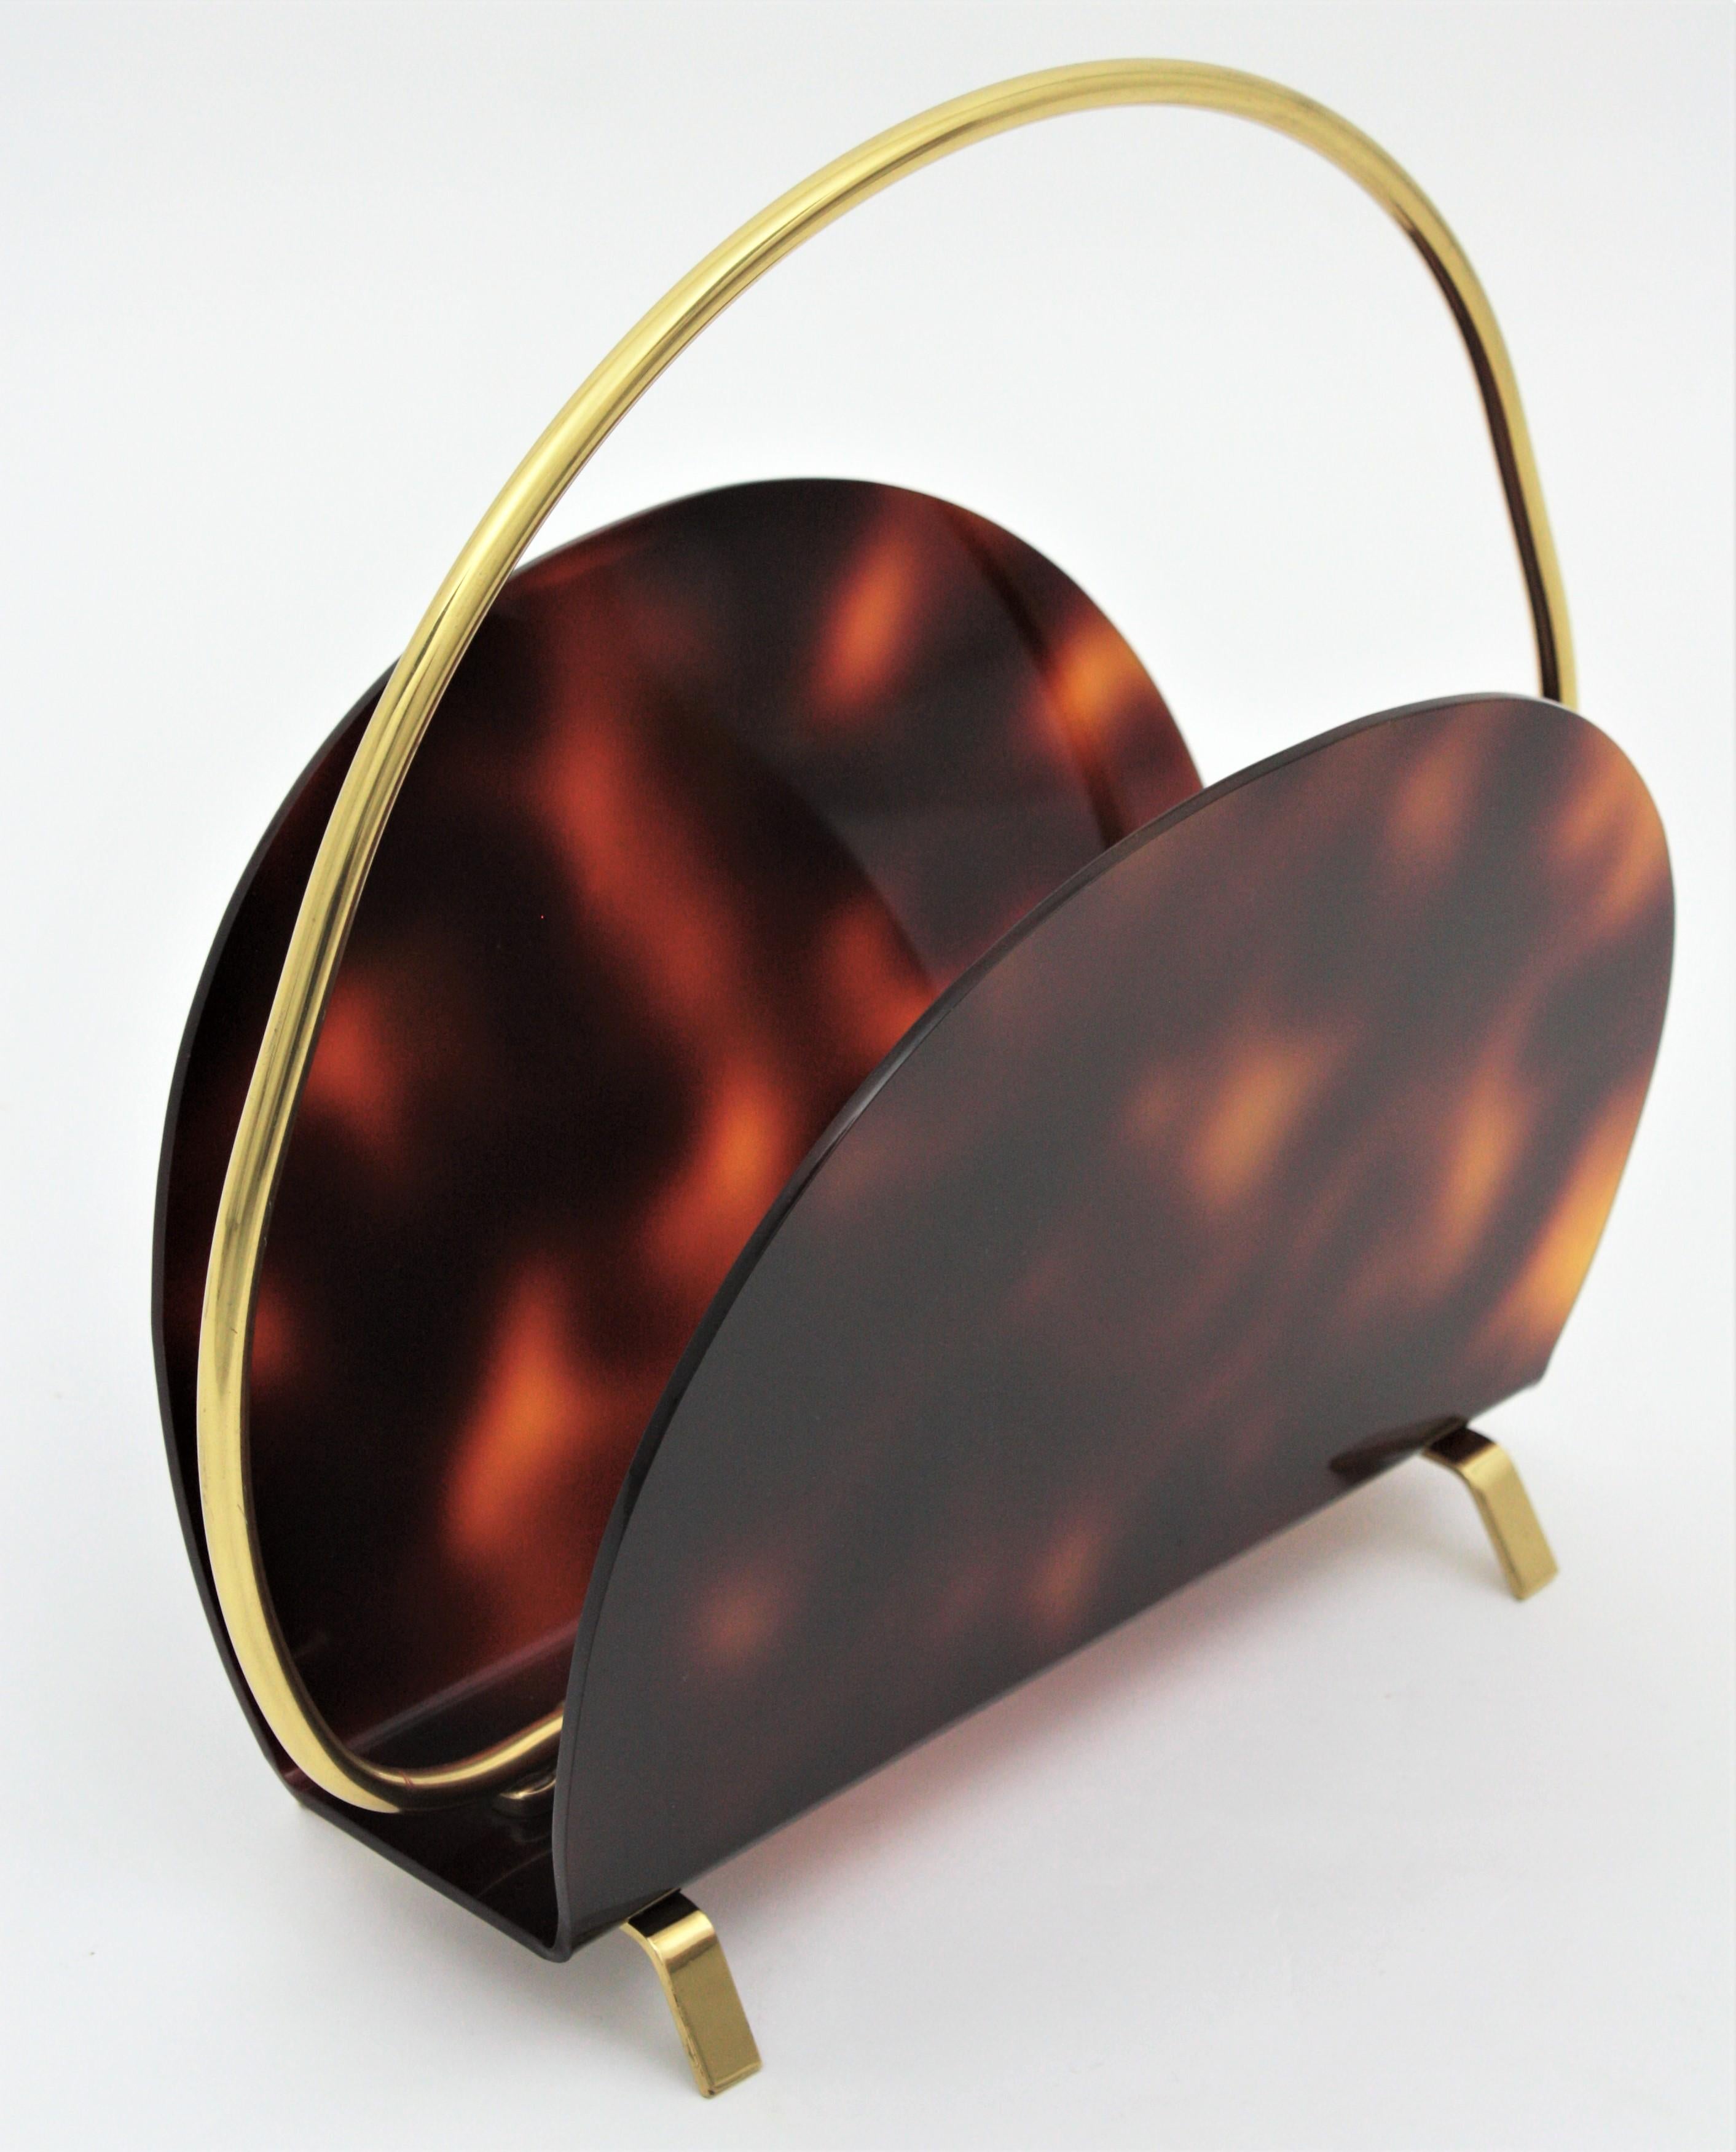 Italian Modern Magazine Rack in Faux Tortoise Shell Lucite and Brass, 1970s For Sale 6